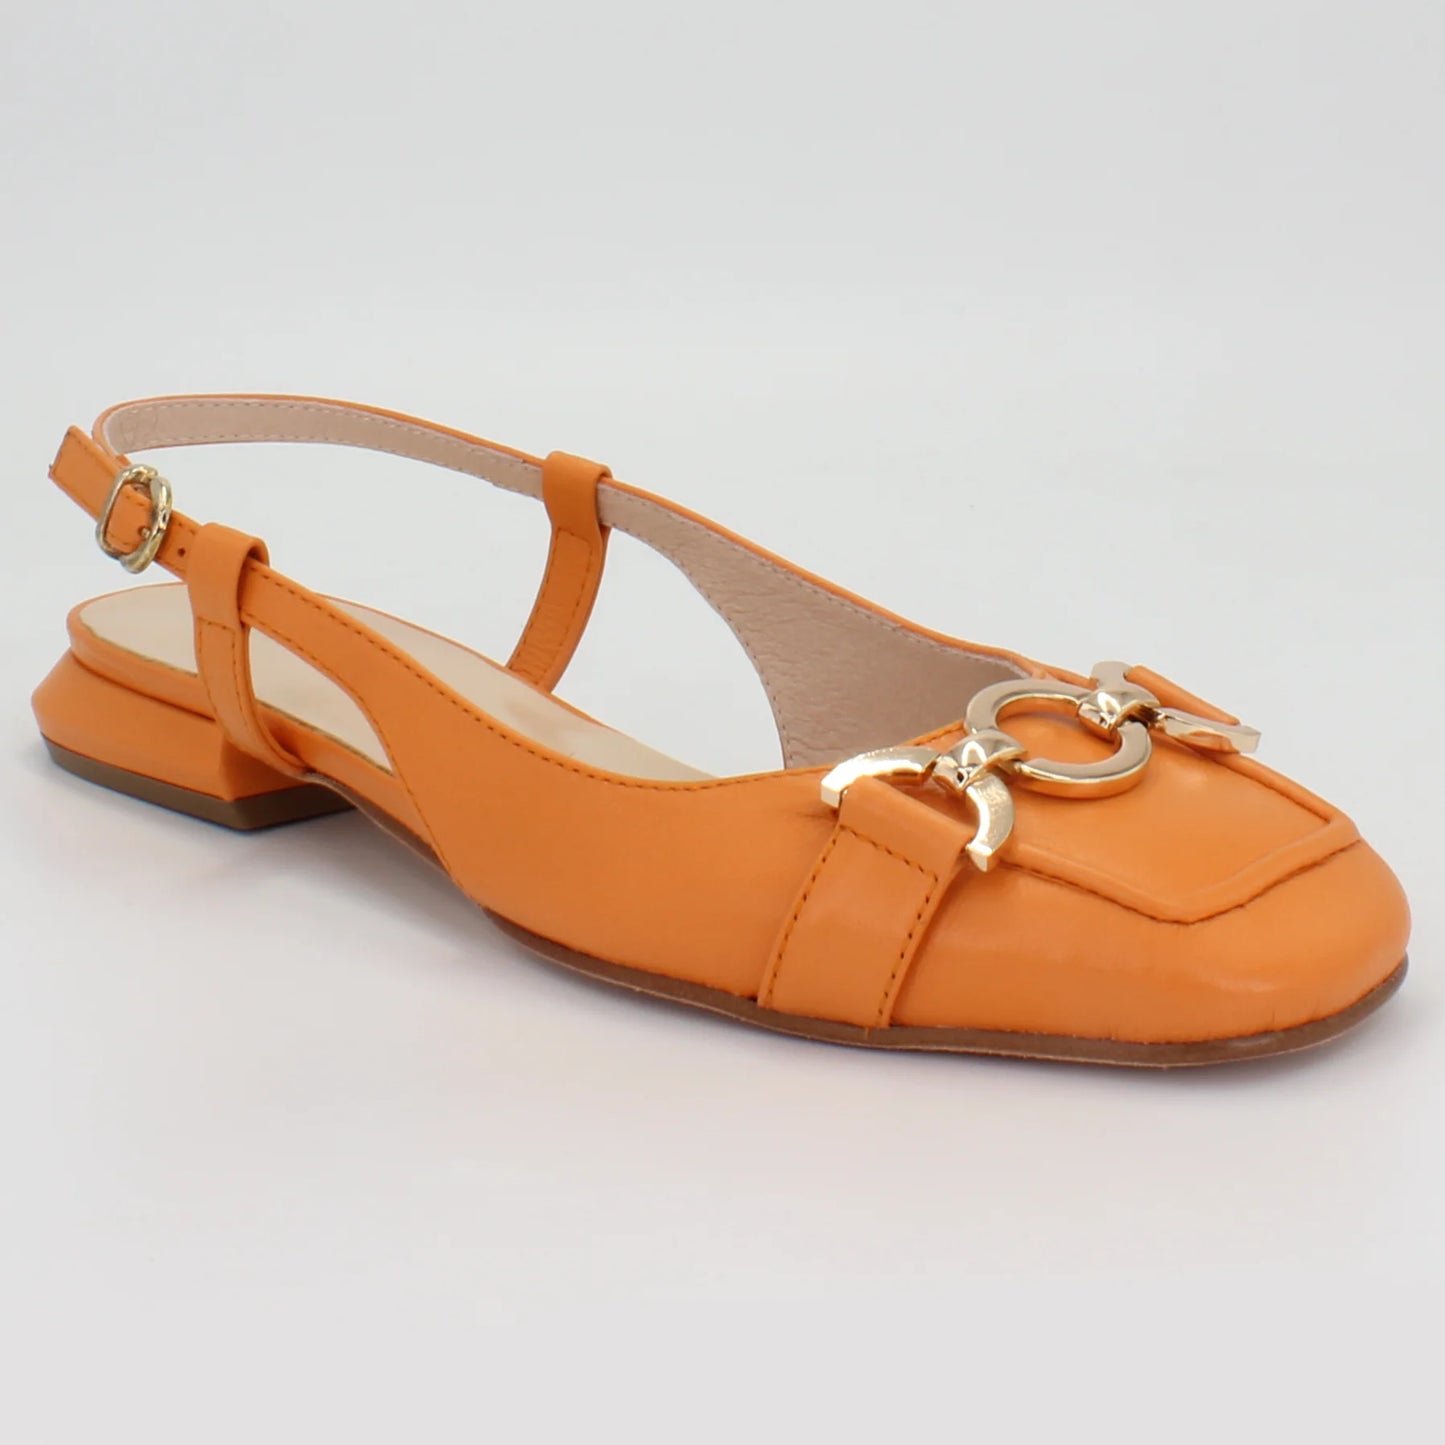 Shop Handmade Italian Leather sling-back moccasin in arancio orange (P255) or browse our range of hand-made Italian shoes in leather or suede in-store at Aliverti Cape Town, or shop online. We deliver in South Africa & offer multiple payment plans as well as accept multiple safe & secure payment methods.